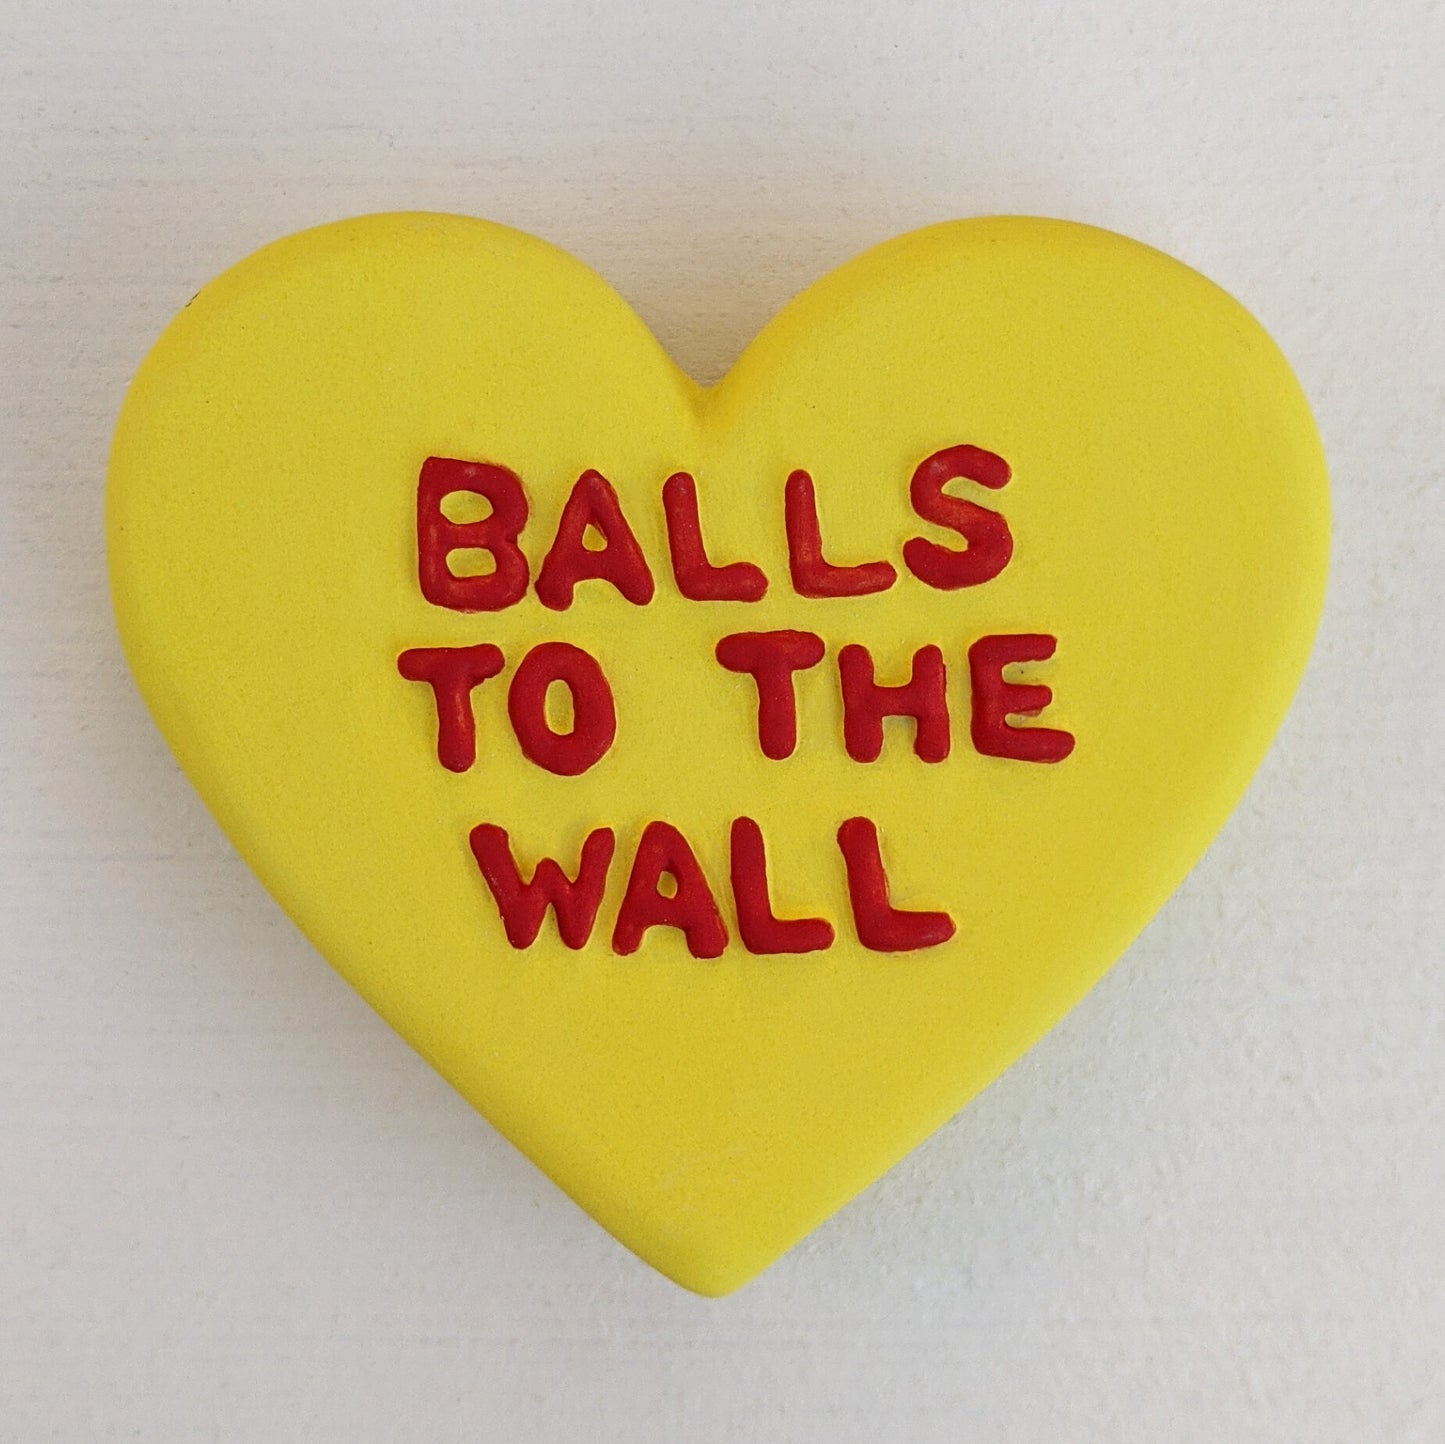 "BALLS TO THE WALL" Porcelain Puffy Conversational Heart